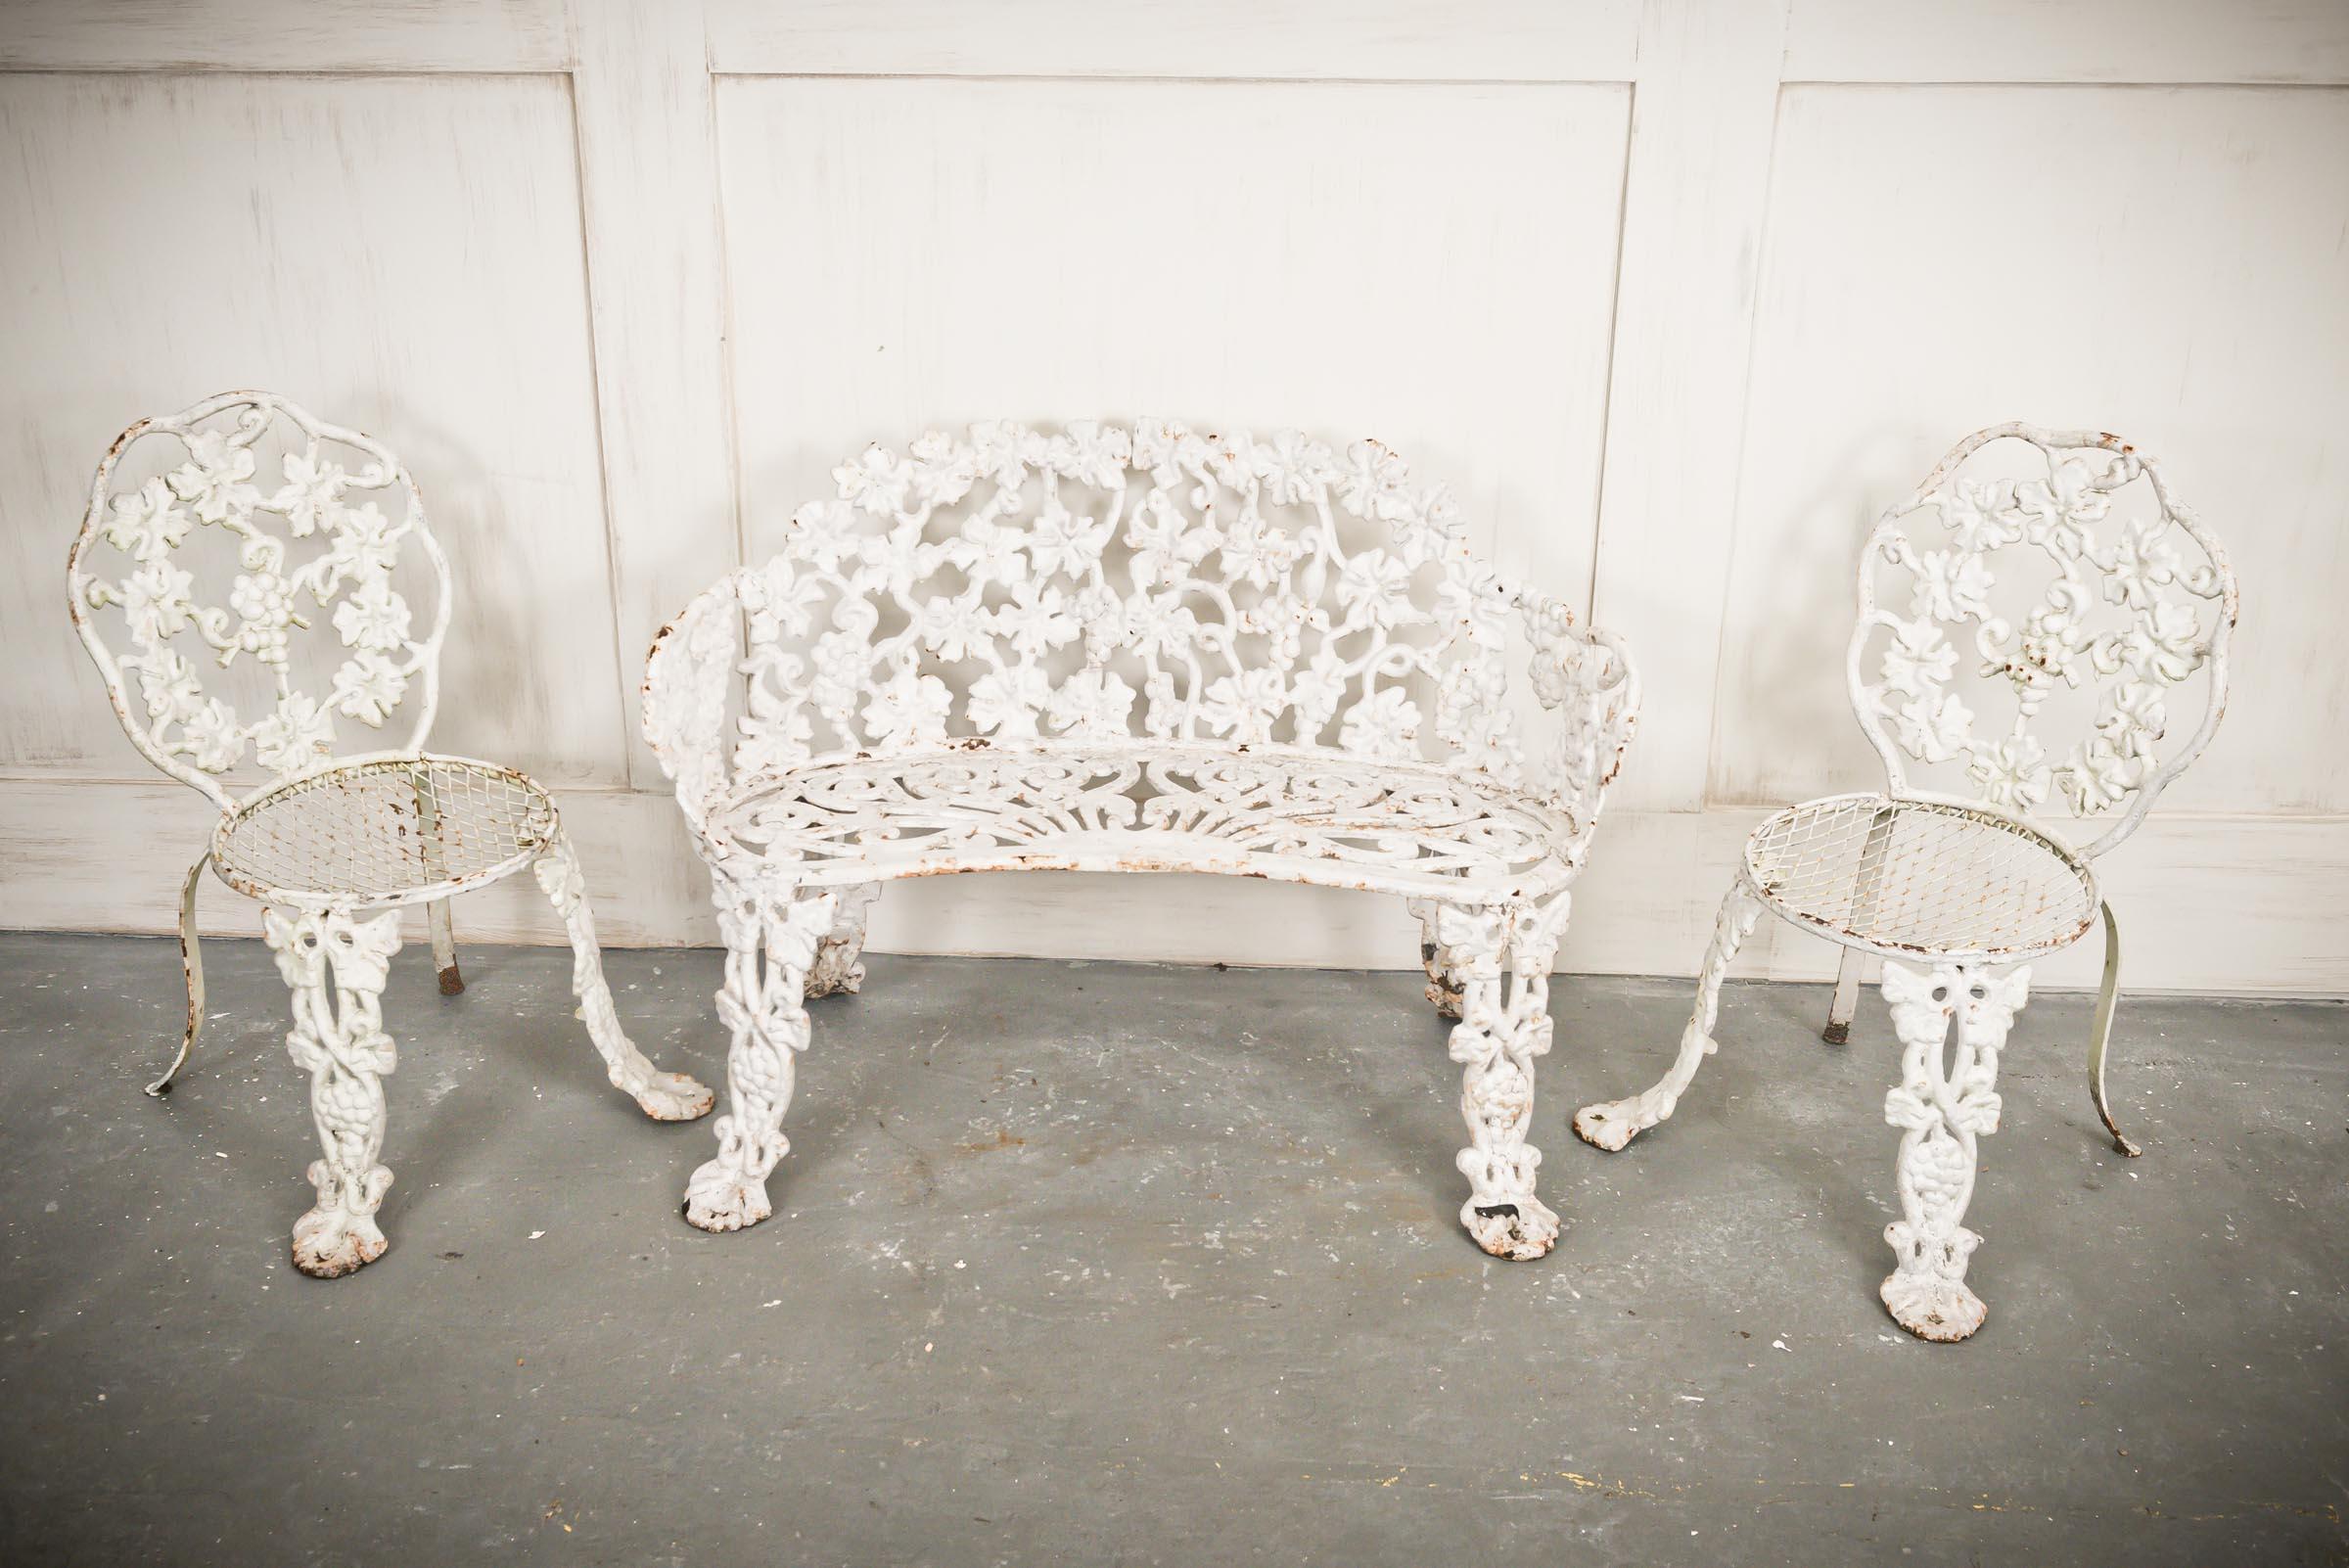 Beautiful duo of cast iron garden chairs with matching bench.
Please request exact measurements if needed.